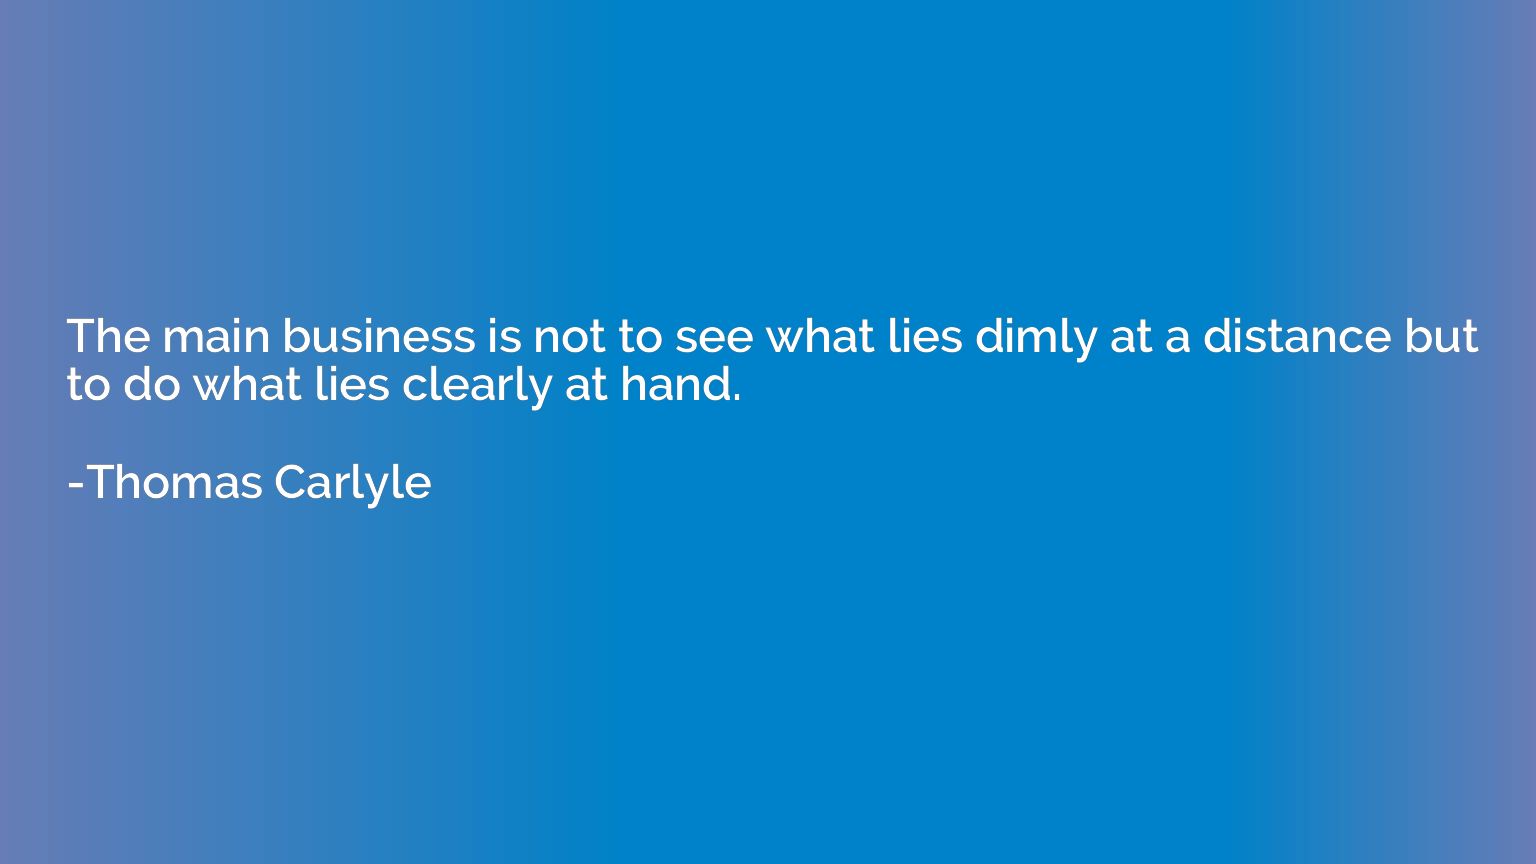 The main business is not to see what lies dimly at a distanc